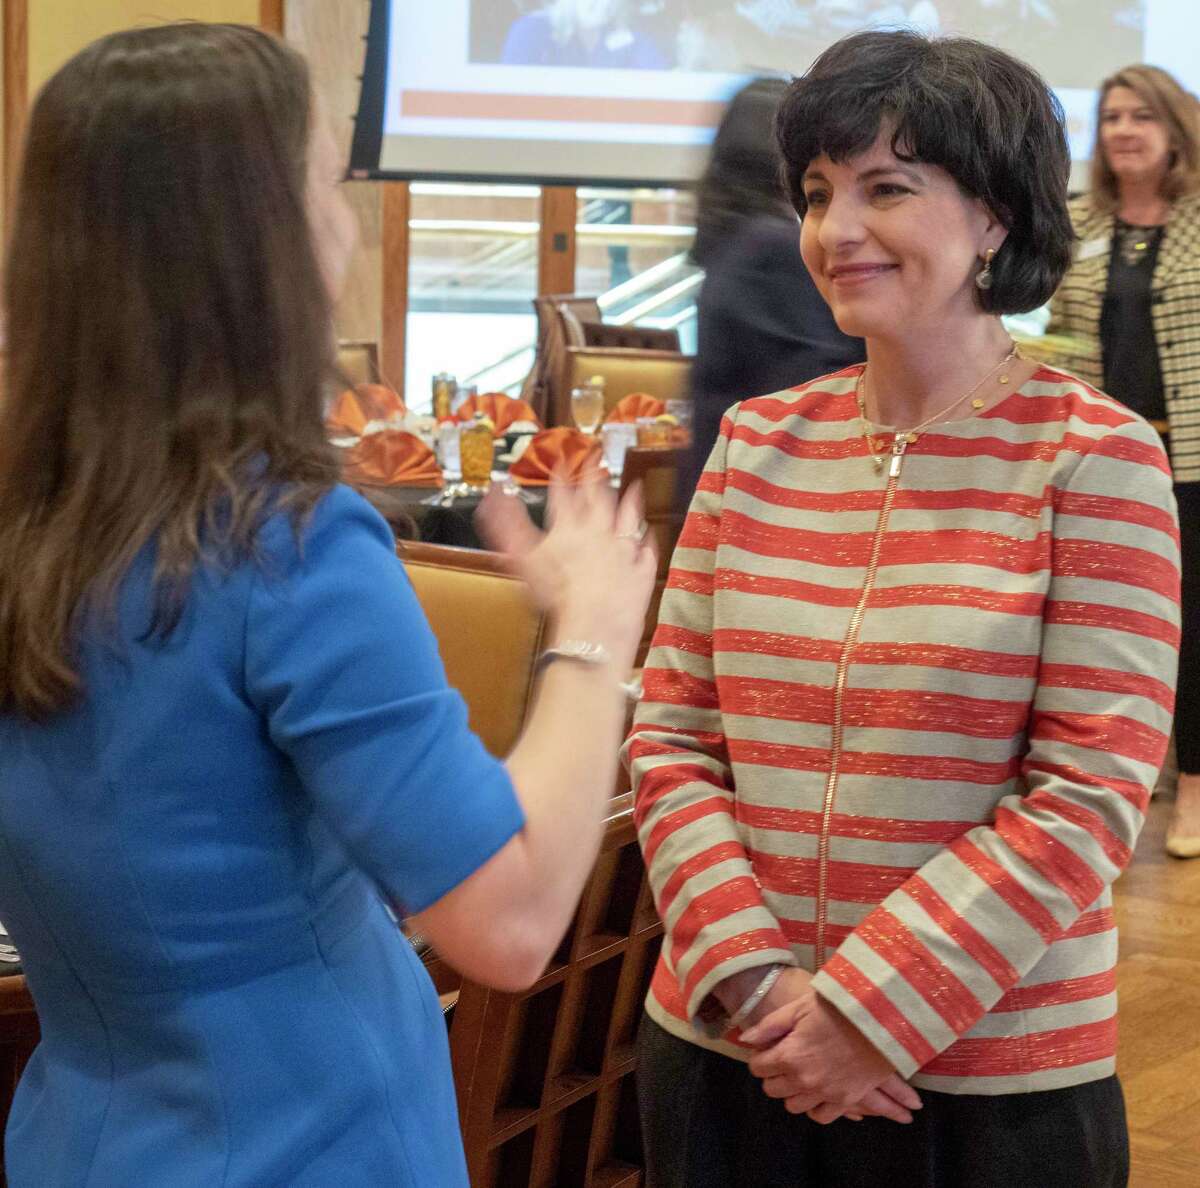 Texas Railroad Commissioner Christi Craddick, talks with Kristin Schmidt before speaking at the Women's Energy Network luncheon.